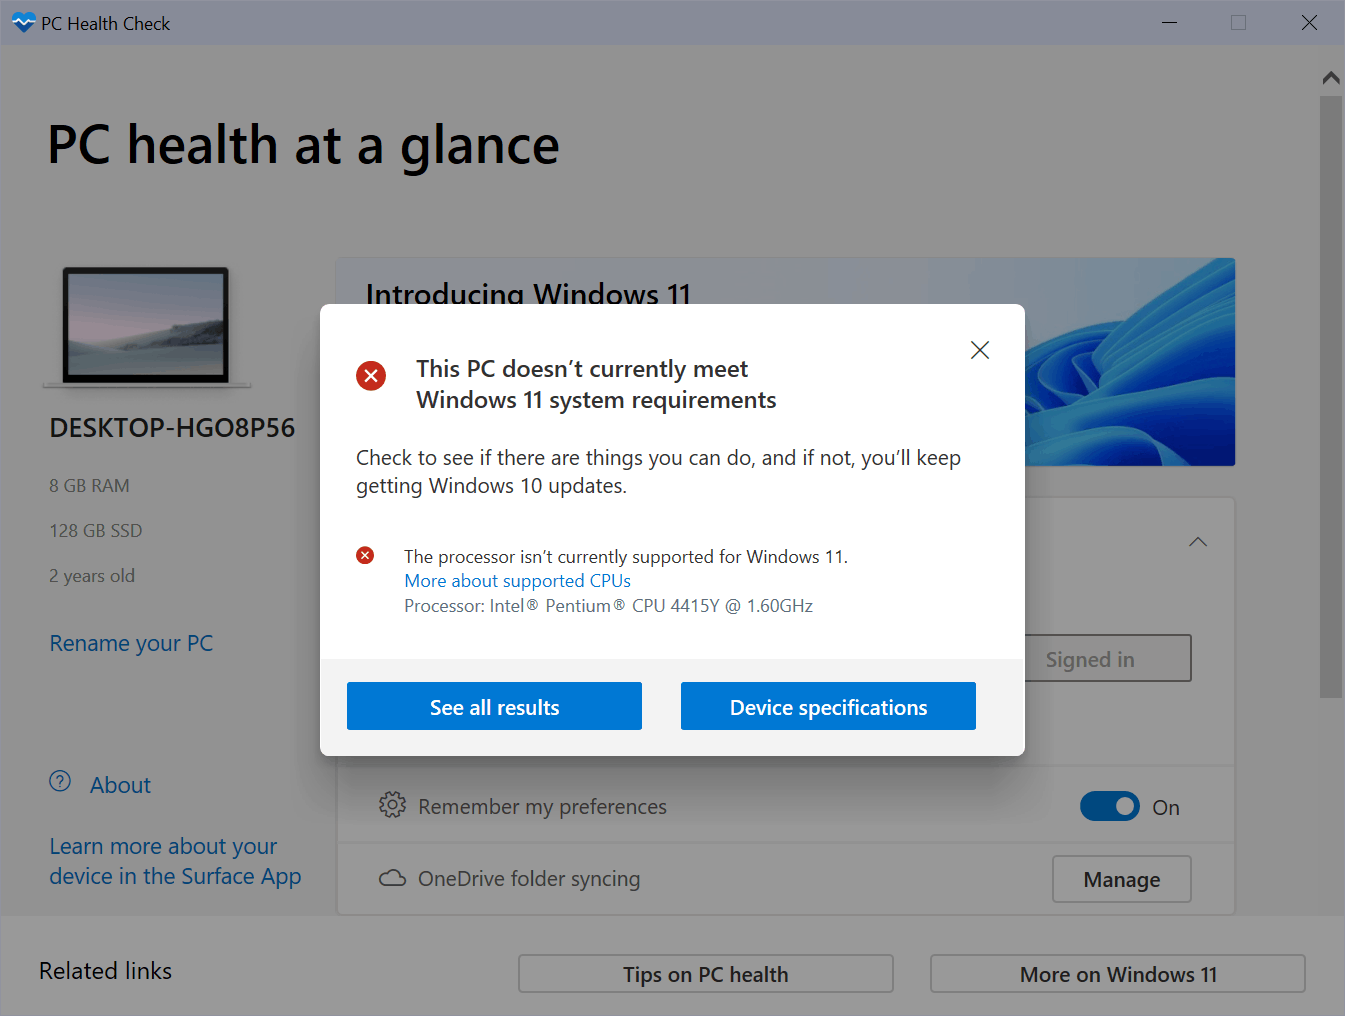 Microsoft's Windows 11 compatibility app PC Health Check is available for everyone now pc-health-check-app.png